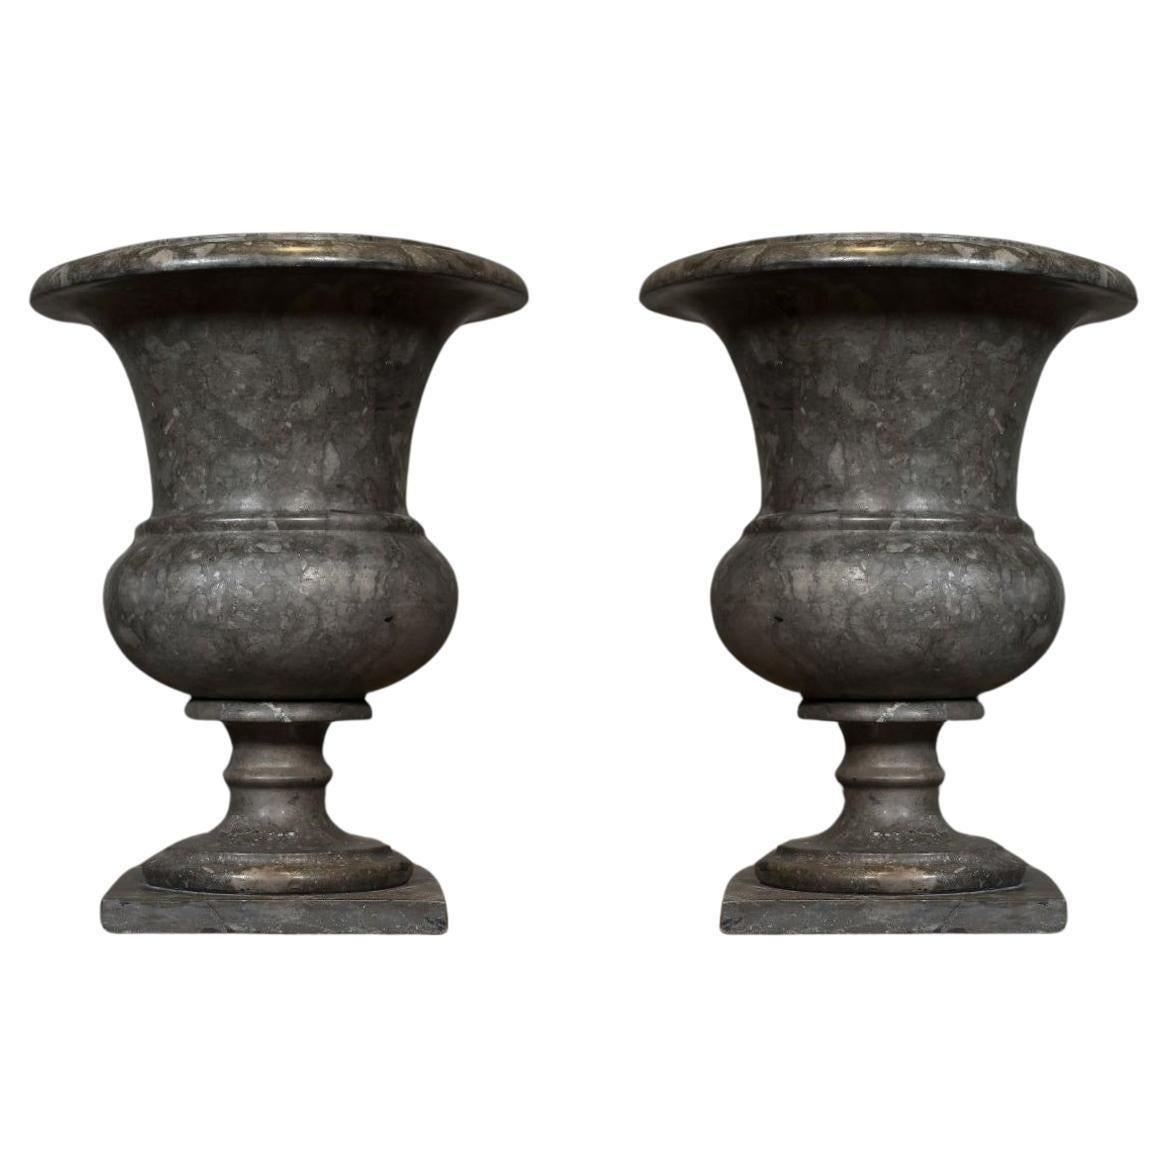 Pair of Large Antique Style Medici Vases in Grey Marble, 20th Century.